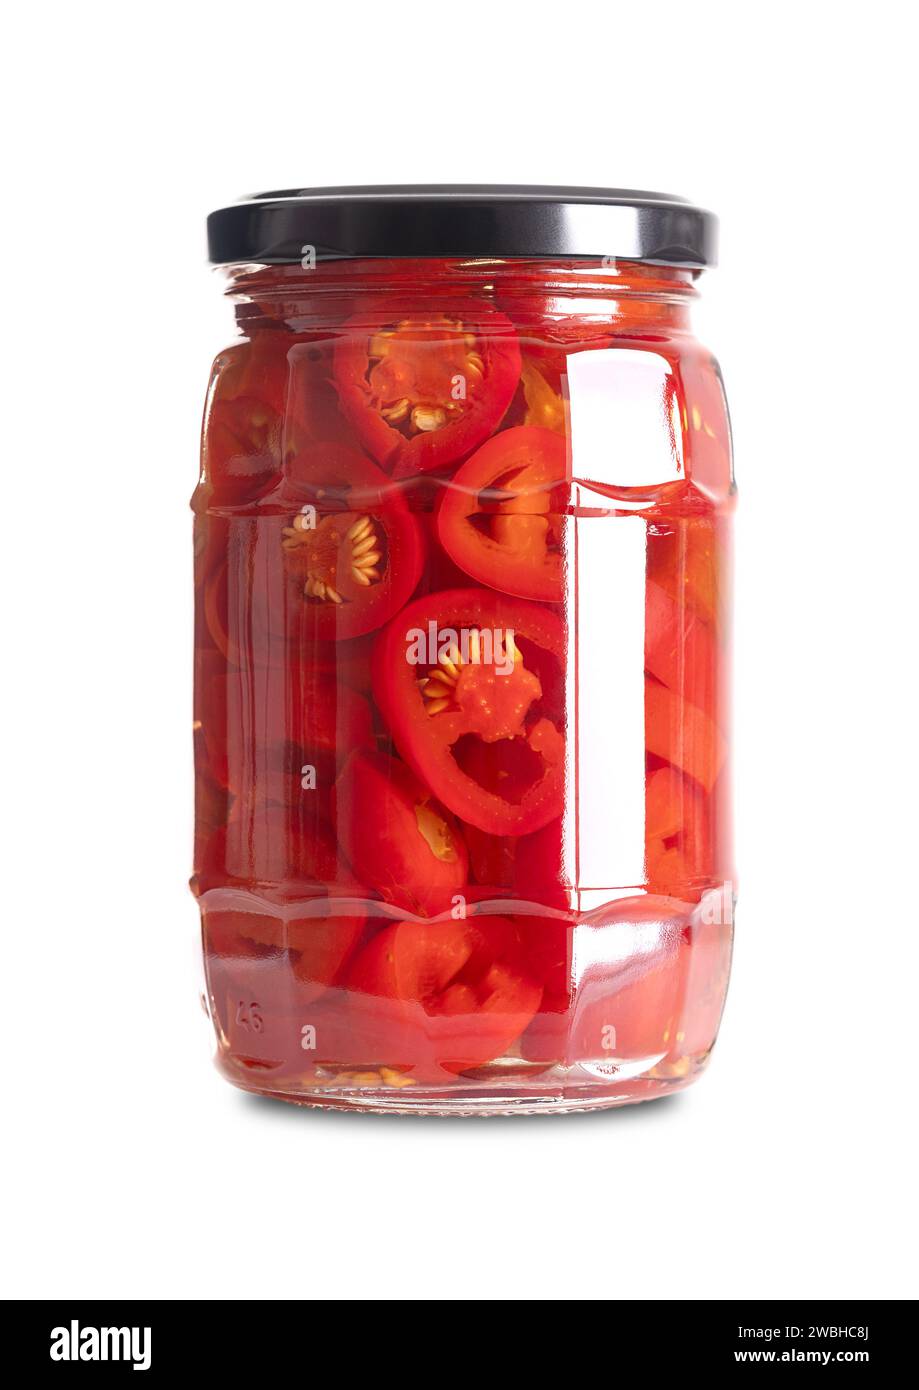 Red jalapeno slices, pickled in a glass jar. Medium-sized hot, red chili peppers, cut into cross sections, pasteurized and preserved in a brine. Stock Photo